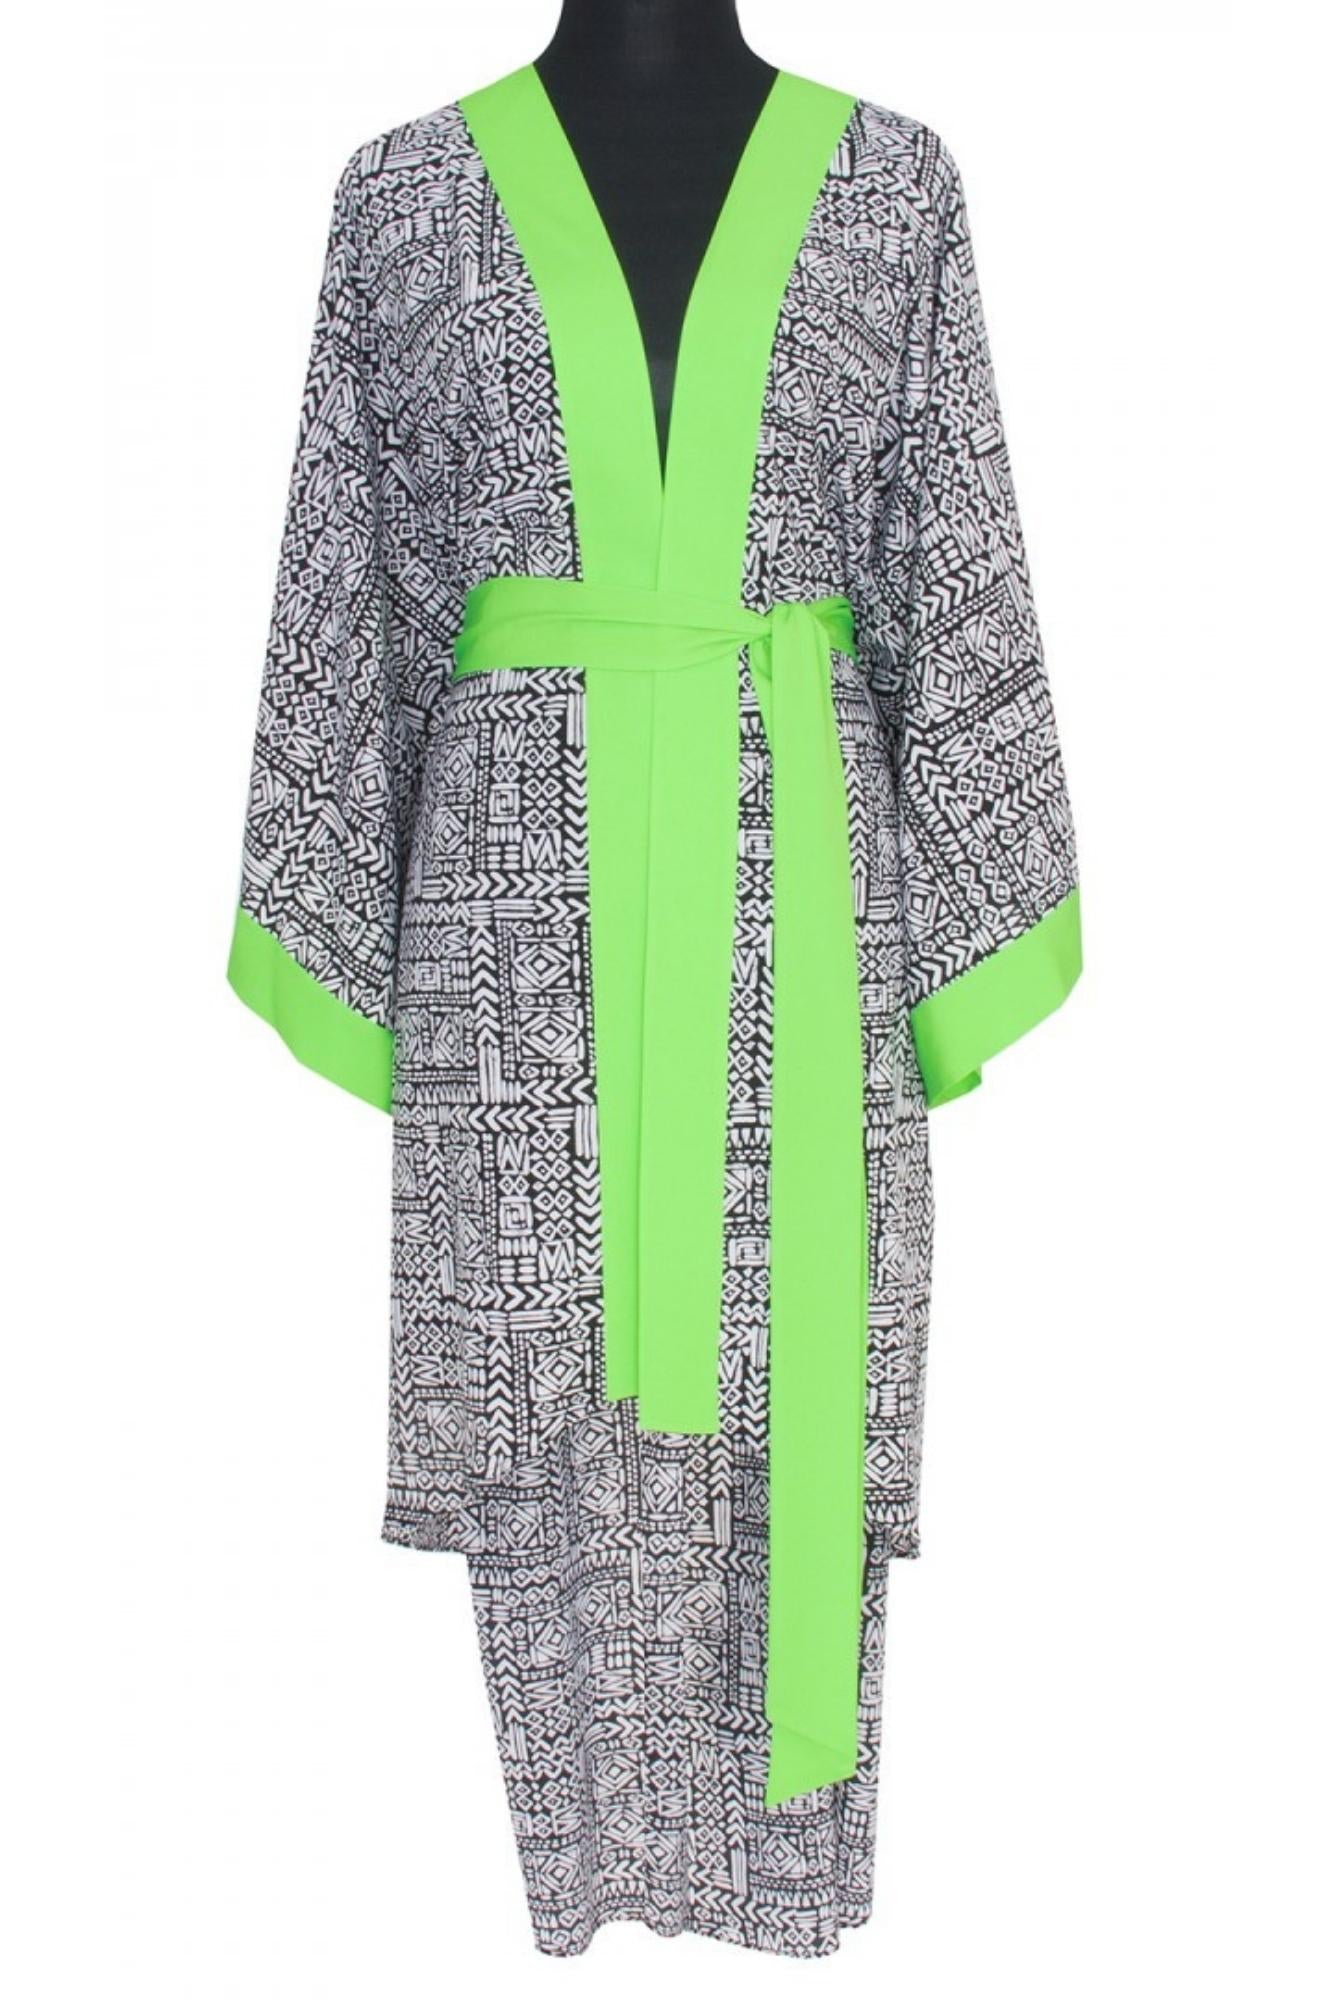 Kimono - Tribal print, with neon green finish.  - Neon green belt and trim  - Neon green tassels on the sides (except for Short Angel-Cut Kimono)  - Sequins evil eye patch on the back-1